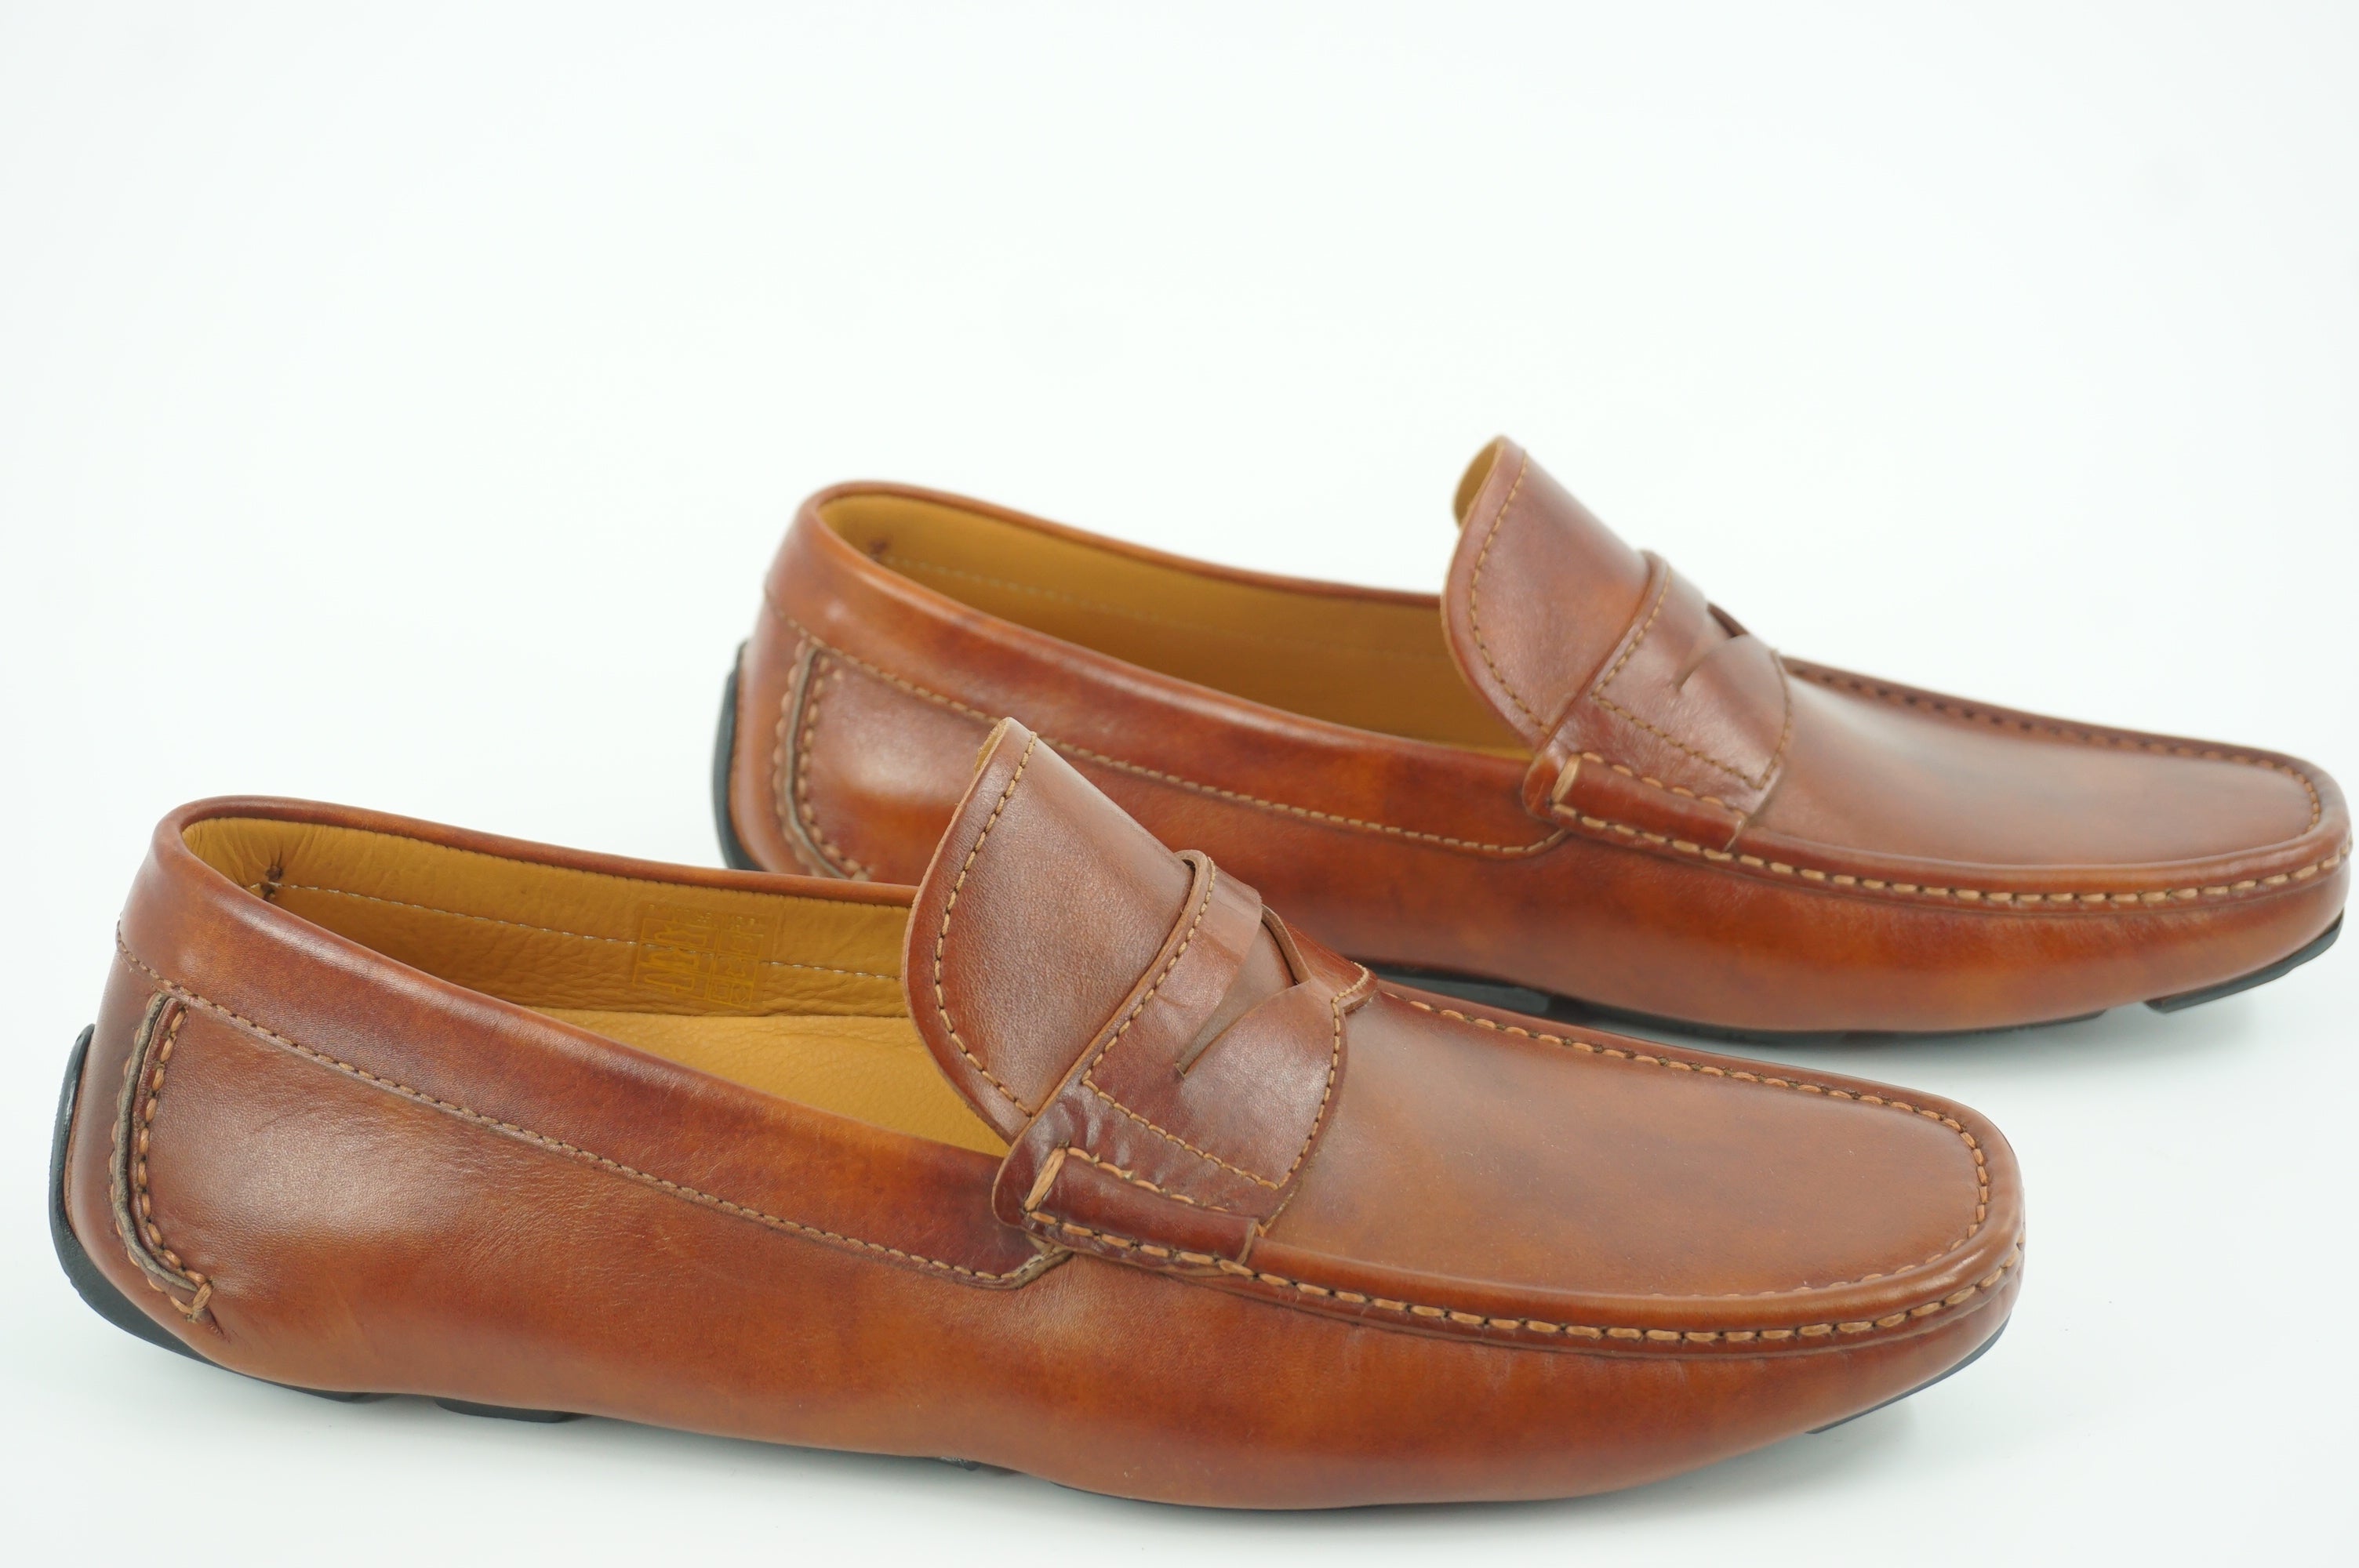 Magnanni Vance Penny Driving Loafers SZ 8 Cognac brown Leather $350 Slip On